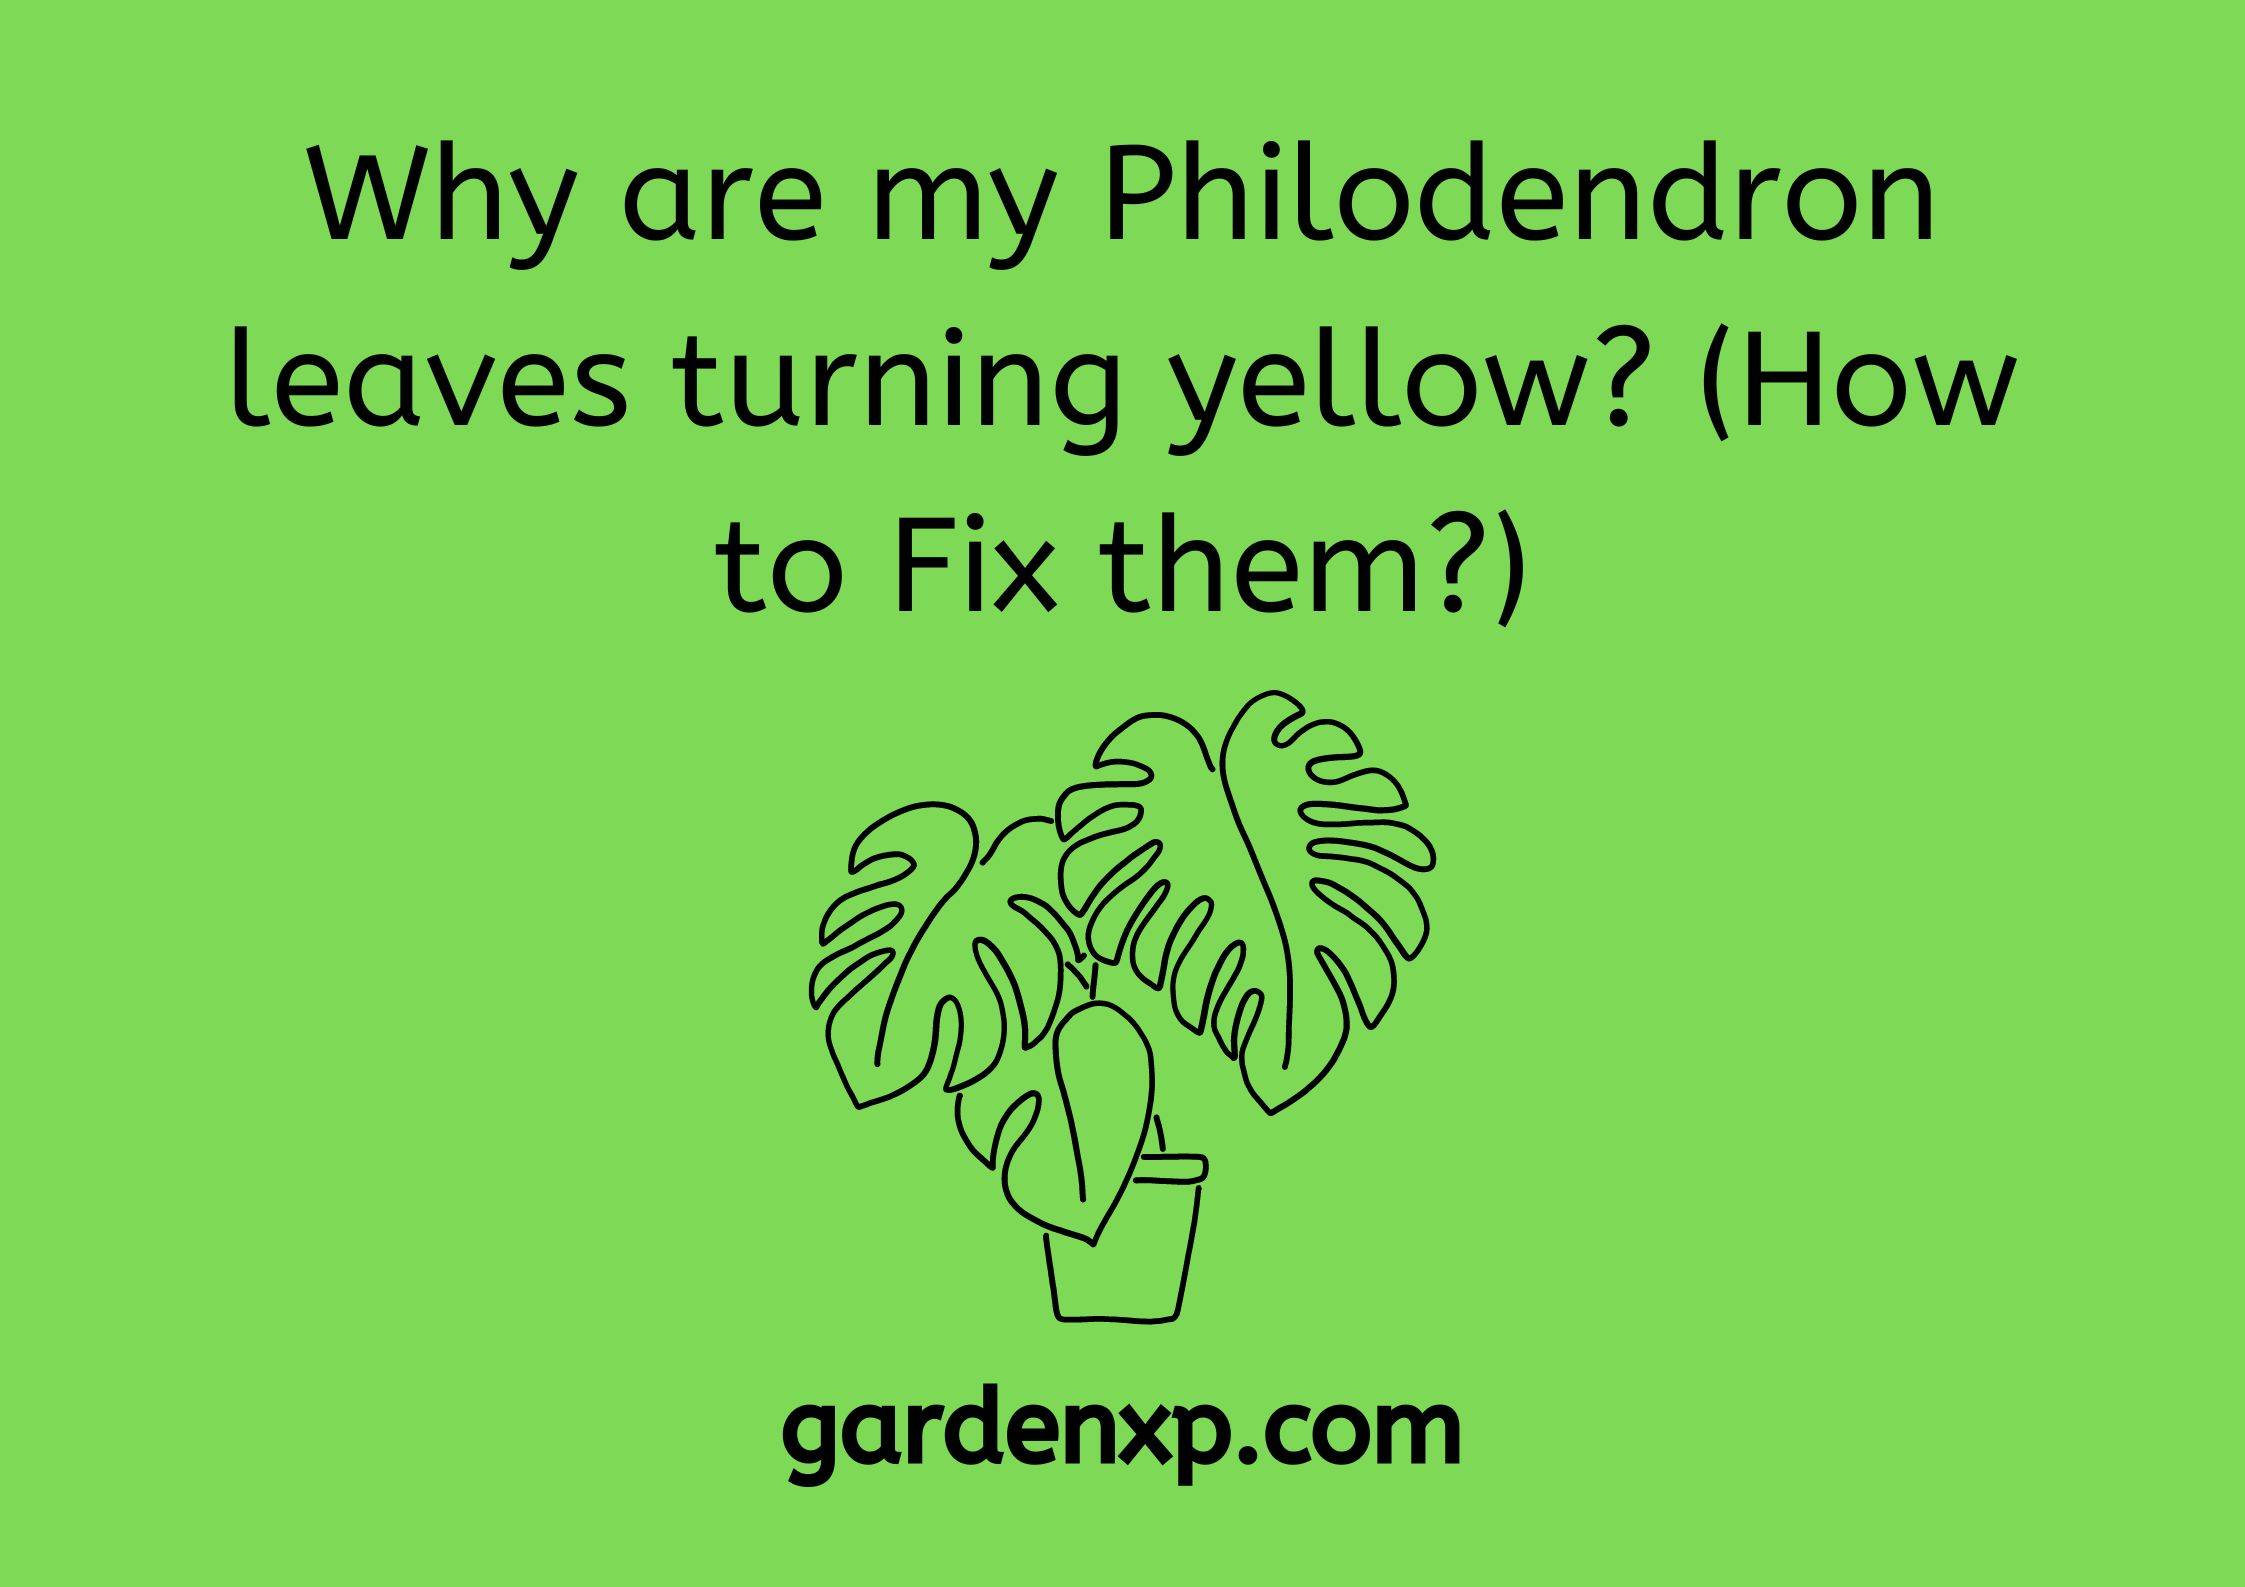 Why are my Philodendron leaves turning yellow? (How to Fix them?)